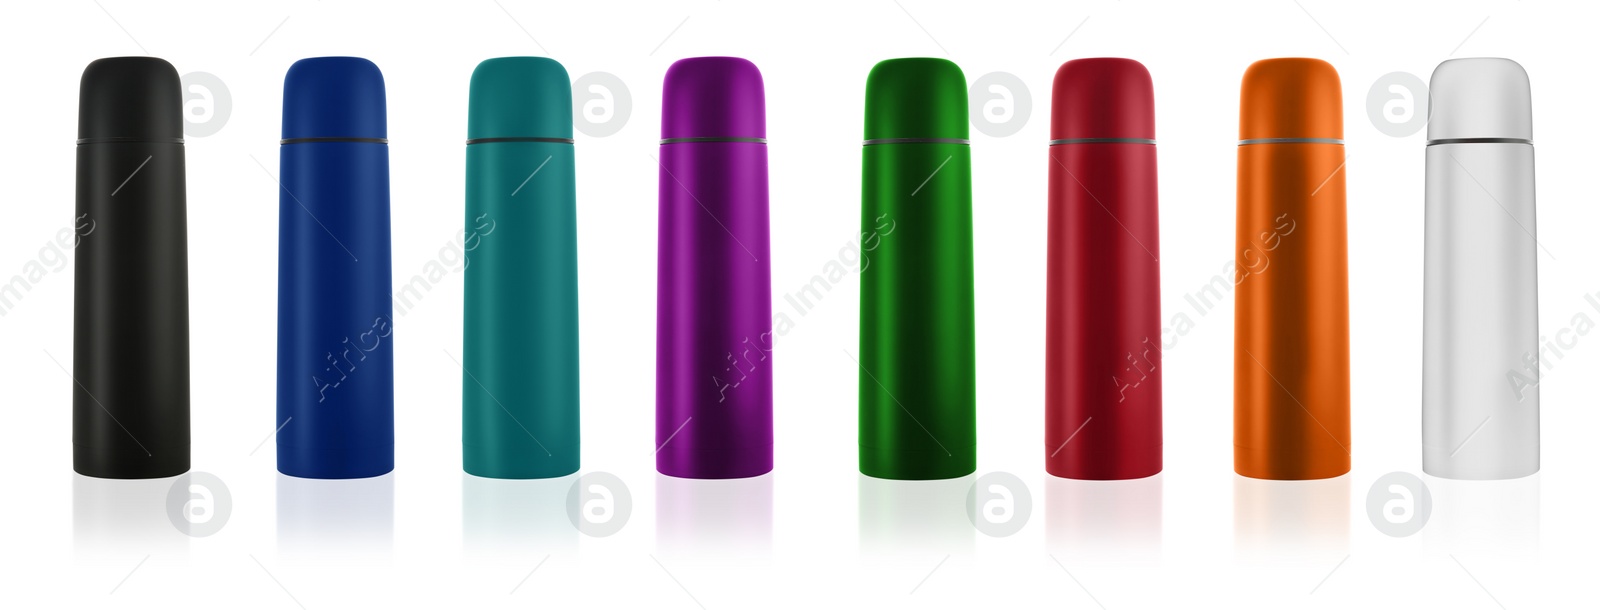 Image of Set of modern thermoses in different colors on white background. Banner design 